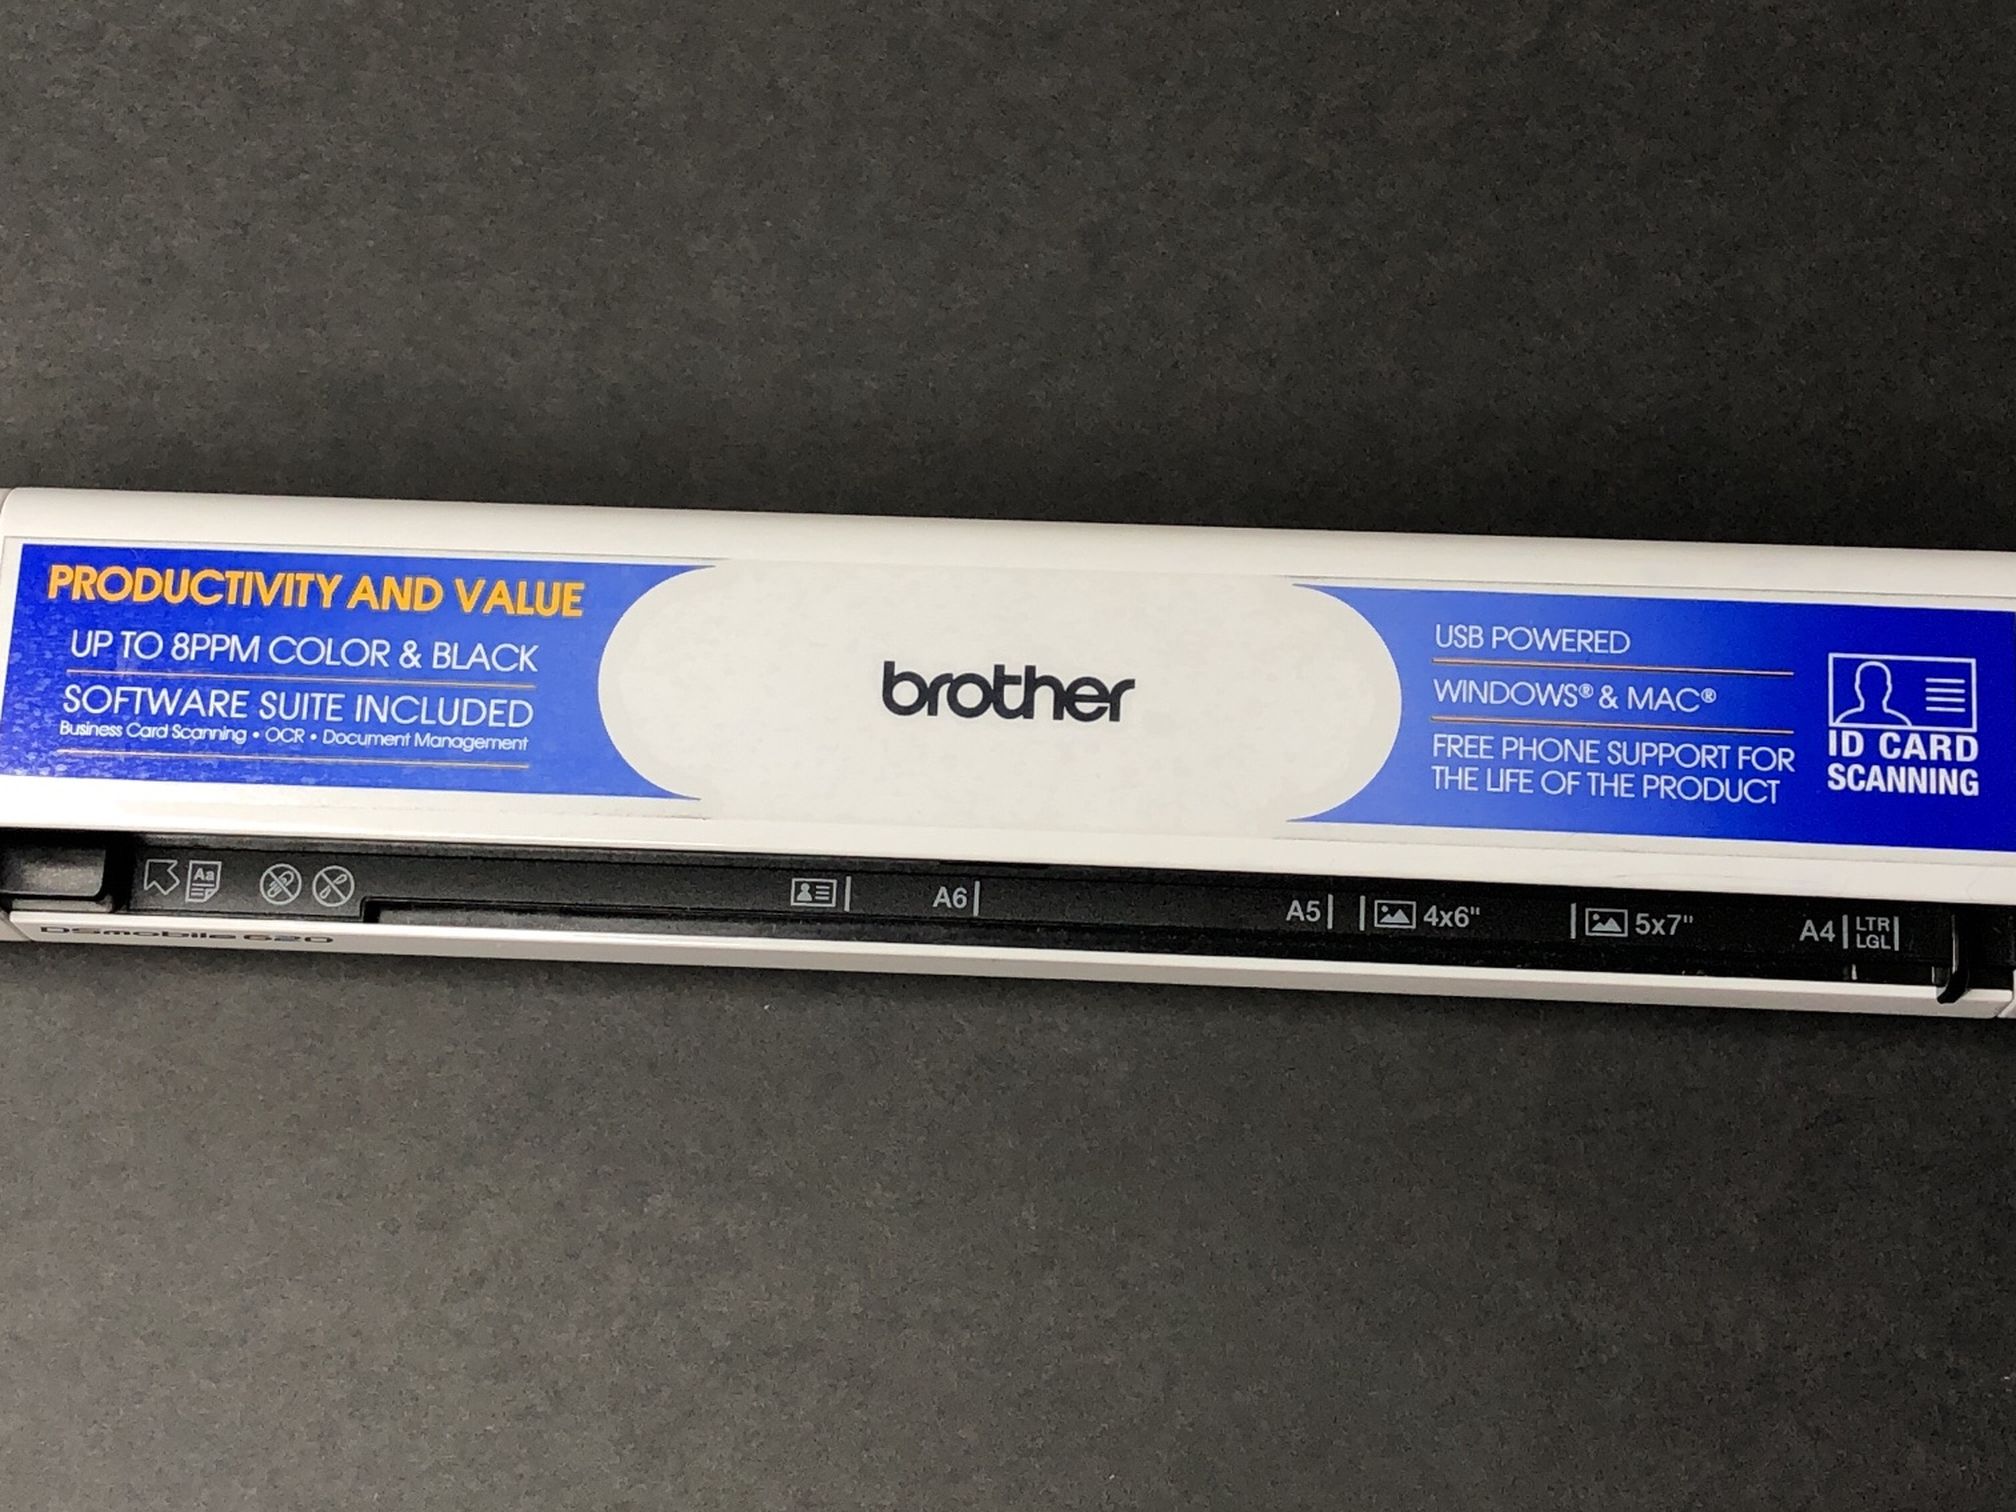 Brother Mobile Scanner